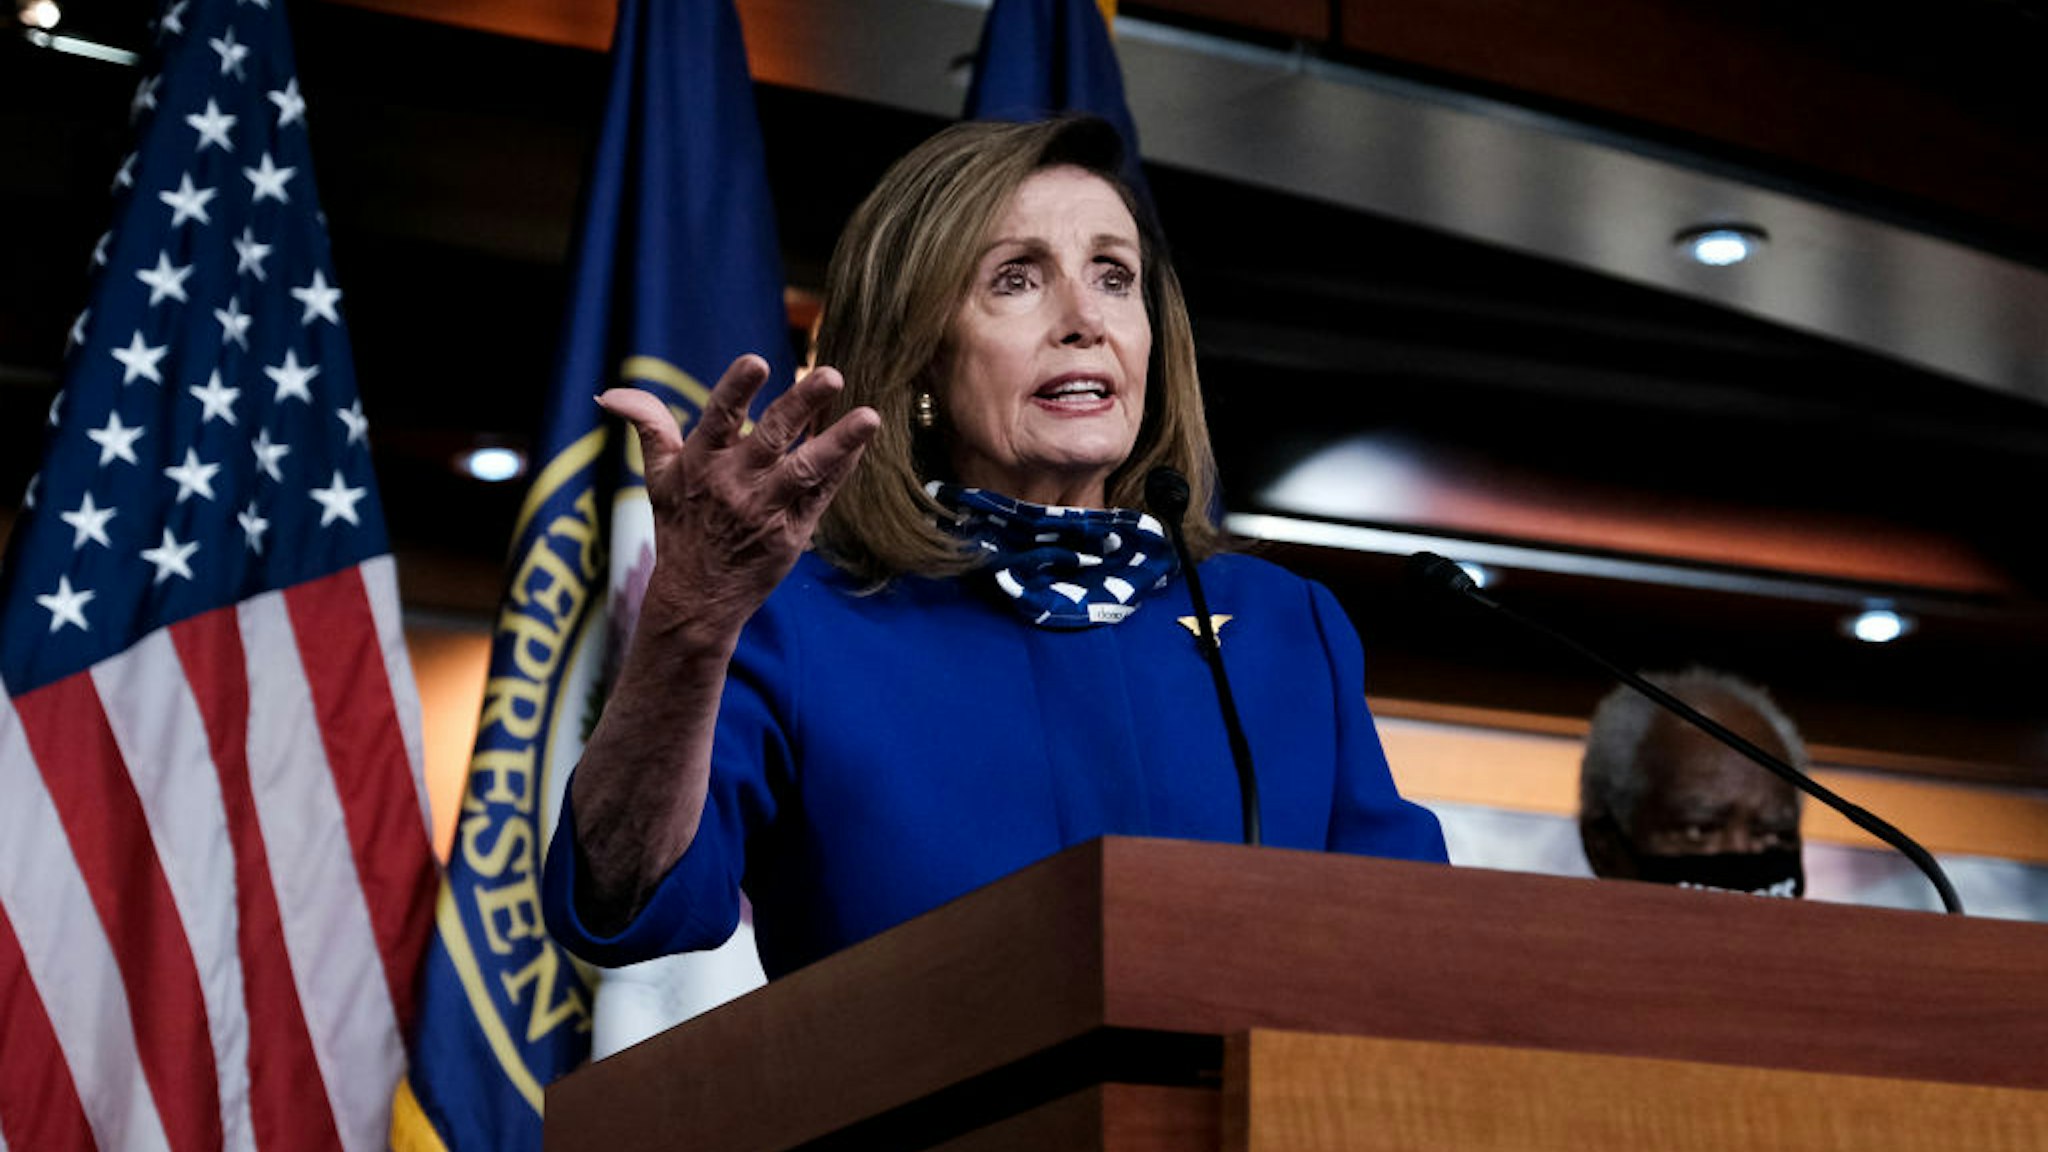 U.S. Speaker of the House Rep. Nancy Pelosi (D-CA) speaks during a news conference on July 24, 2020 in Washington, DC.